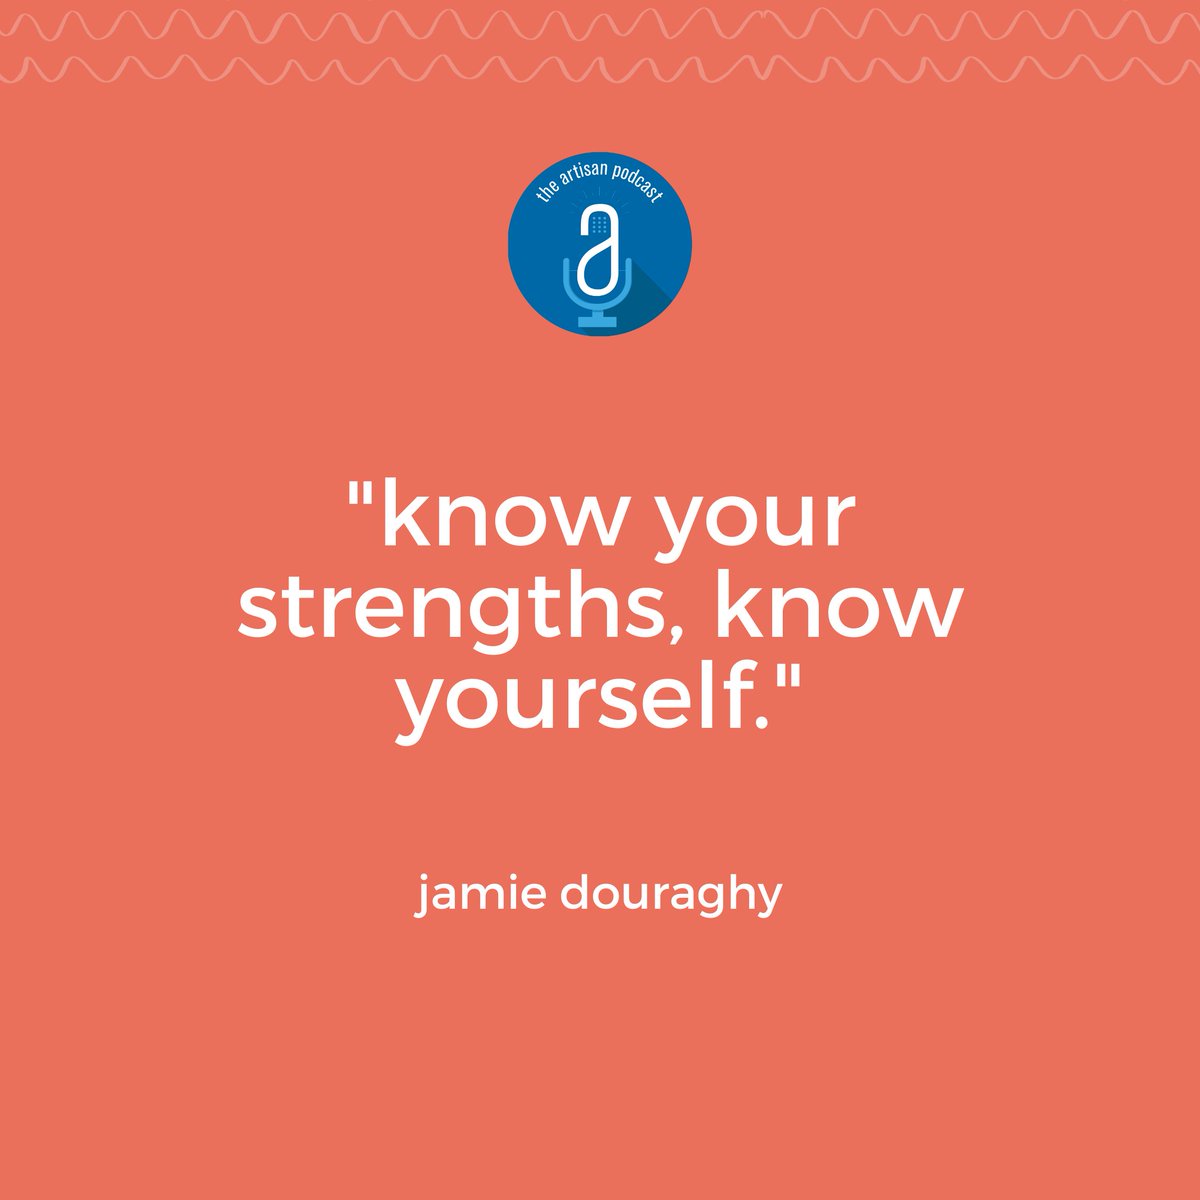 In our latest podcast, Jamie explores using CliftonStrengths to uncover individual and team strengths. 'Know your strengths, know yourself' for business success. Tune in for insights!  zurl.co/KlKB
 
#cliftonstrengths #gallup #teamgrowth #companysuccesstips